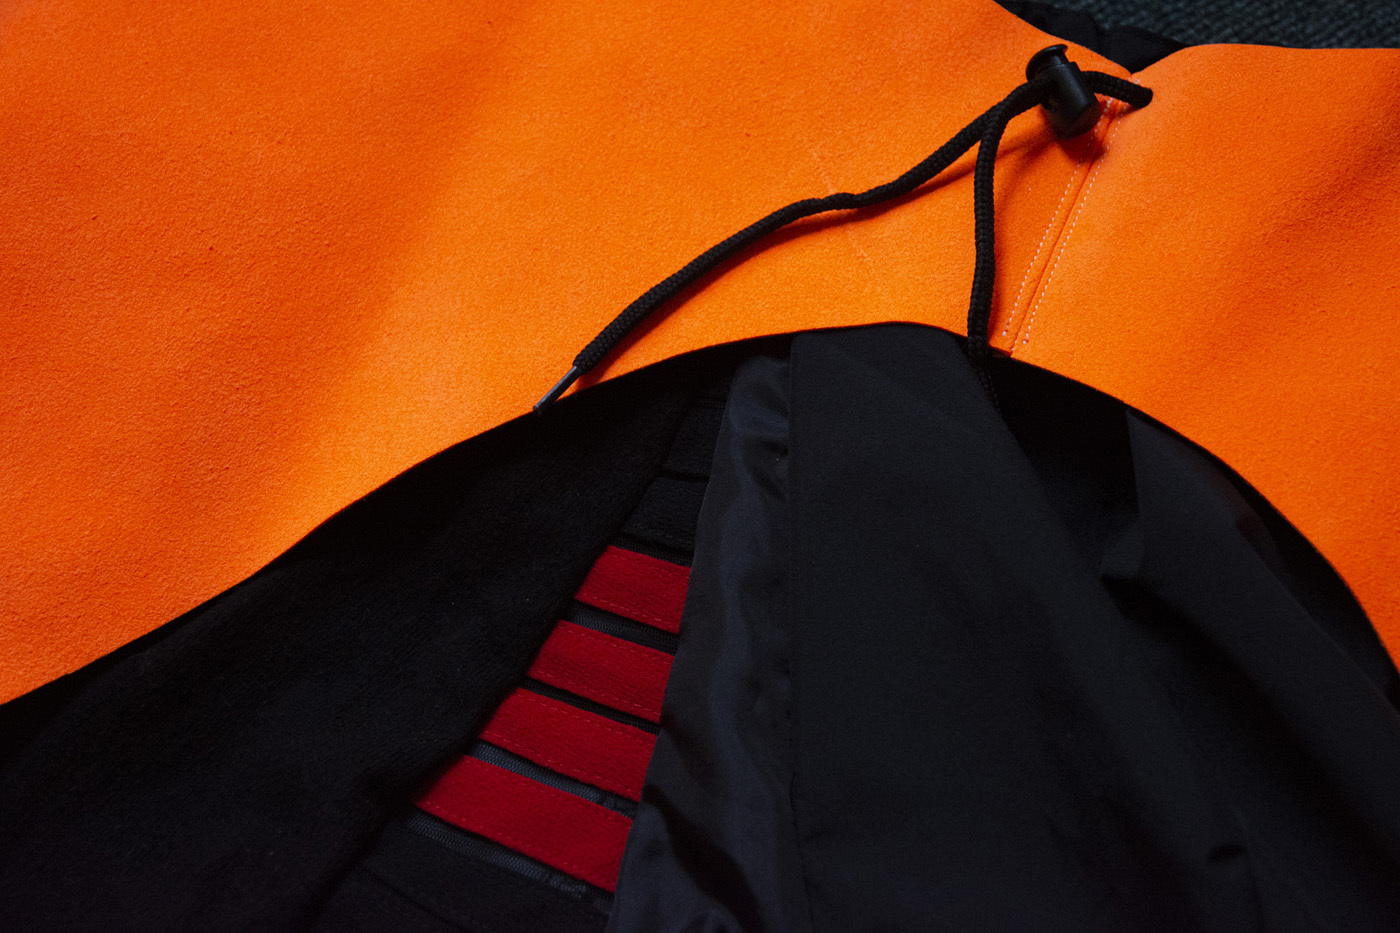 A close-up image of a bright orange fabric that has a black drawstring running through it.